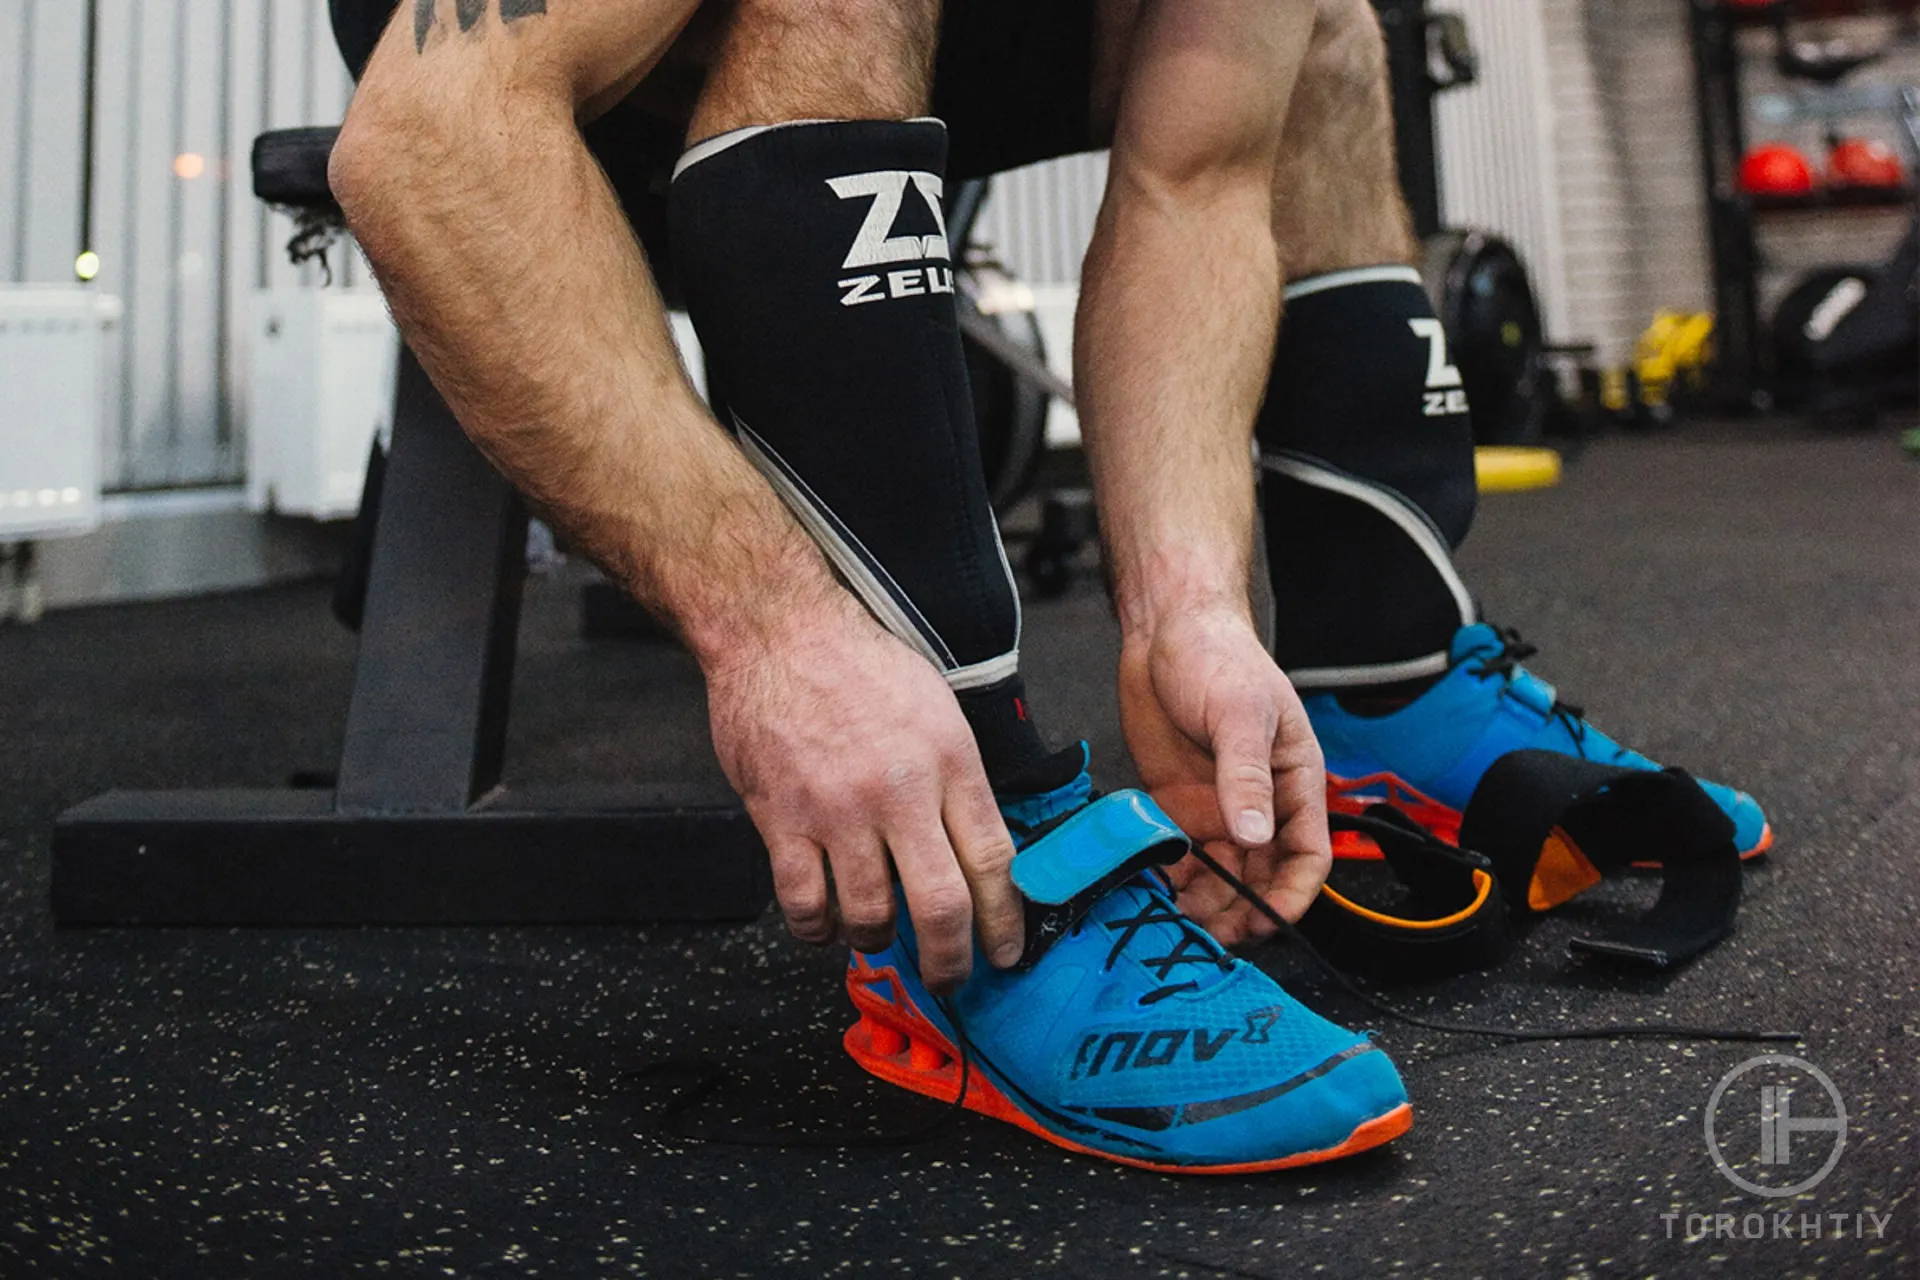 WBCM athlet is prepearing shoes for training